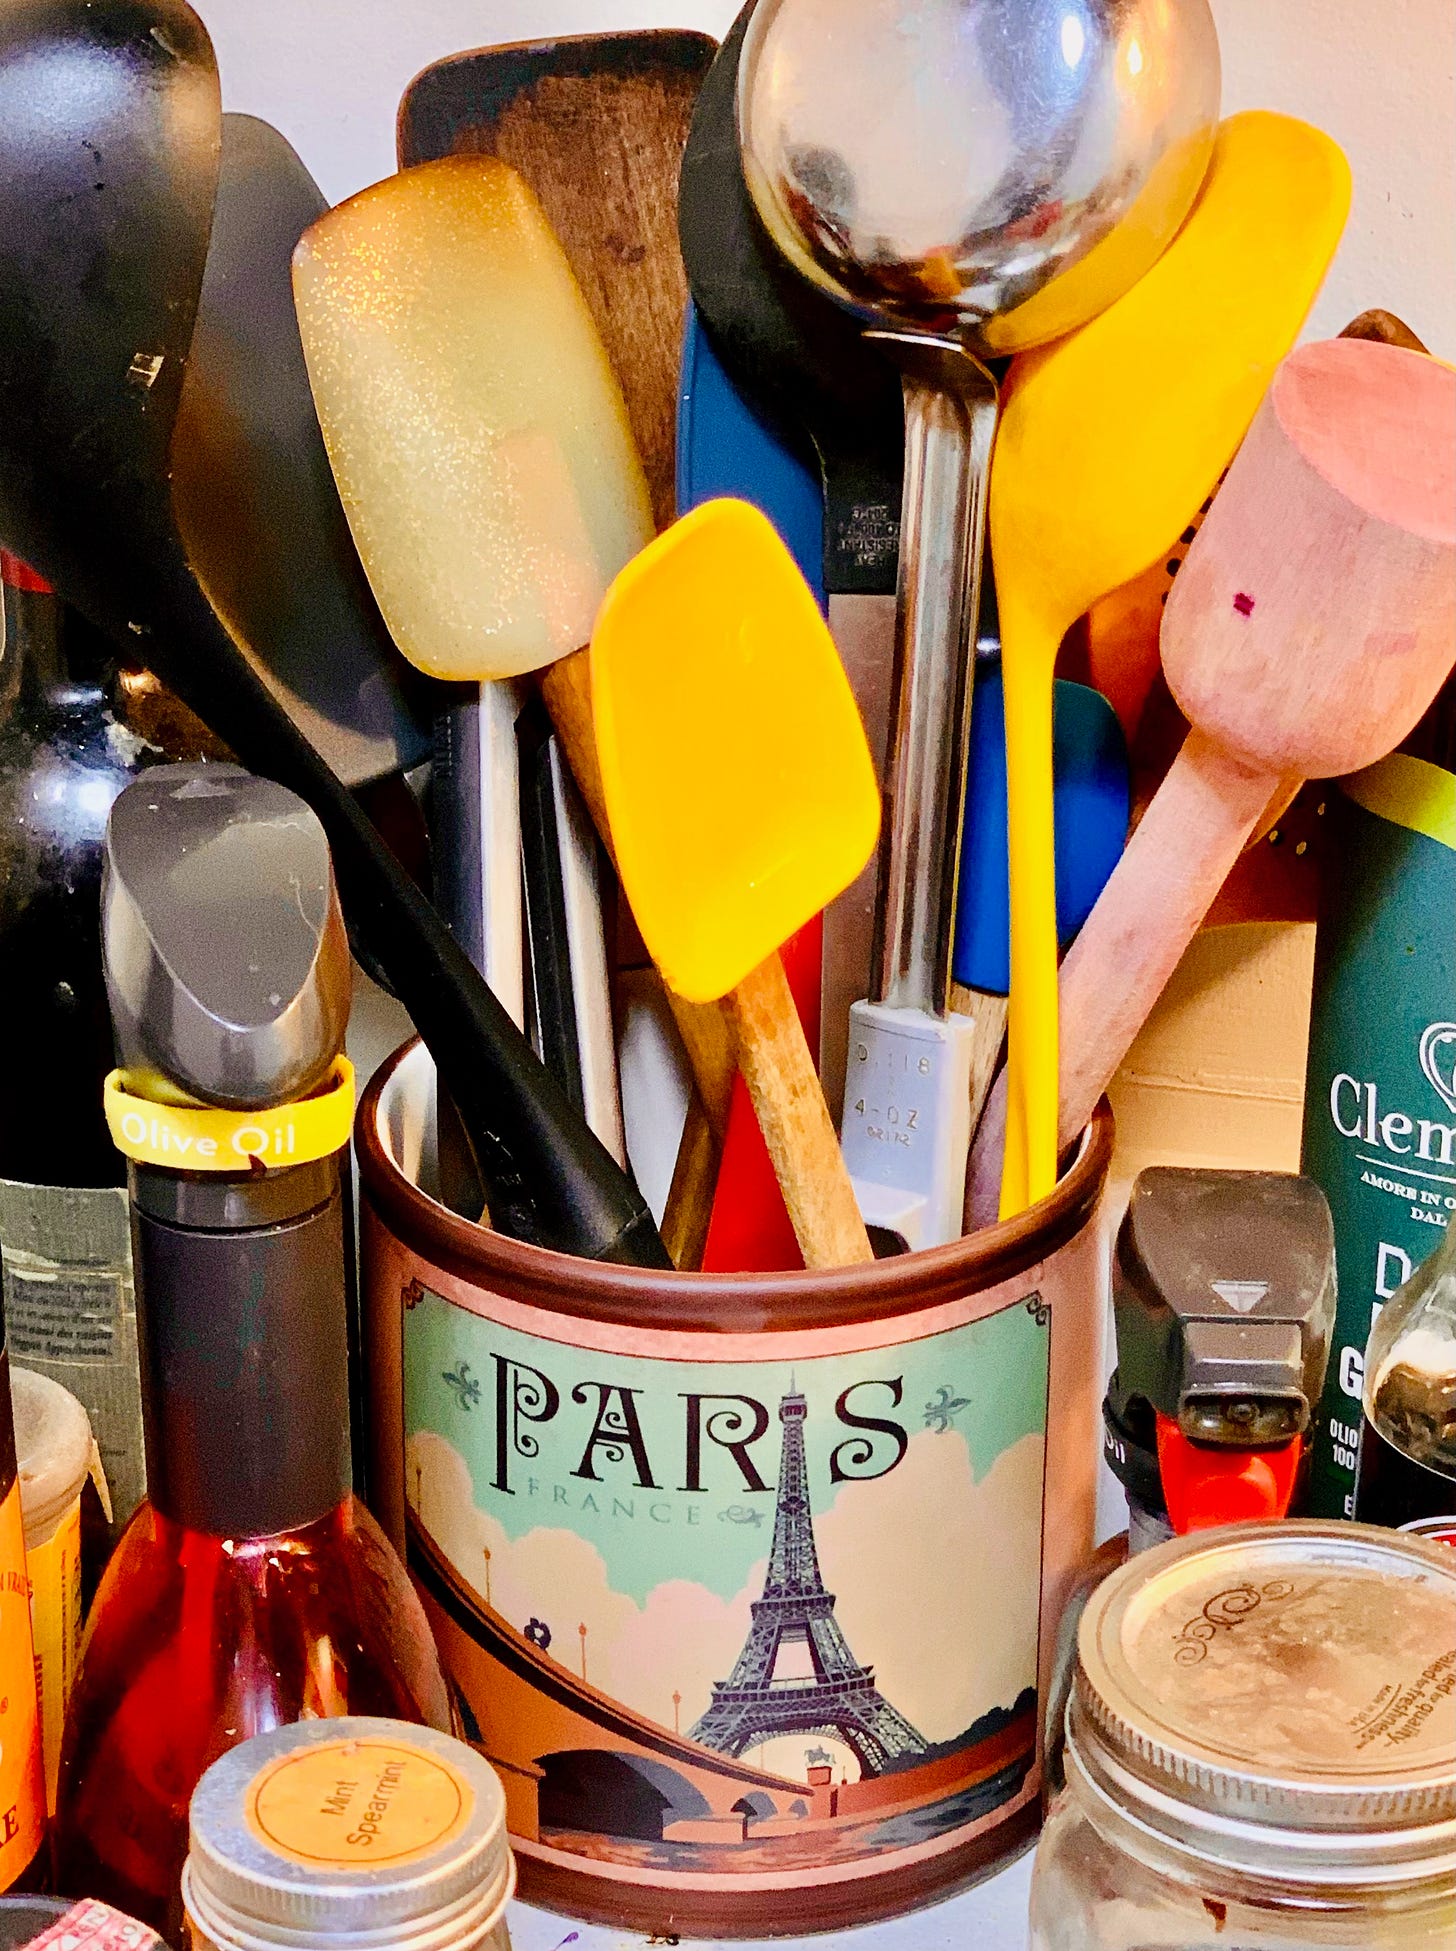 A crock on whose side is an image of a bridge over a river (the Seine, presumably) and in the background the Eiffel Tower, whose tip serves as the "i" in the word "PARIS." The crock is filled with utensils — 3 silicone spatulas (yellow, blue, and cream-colored), a kraut pounder, 3 wood spatulas, several wood spoons, a steel ladle with a grey handle, yellow plastic large spoons including a large round perforated spoon.